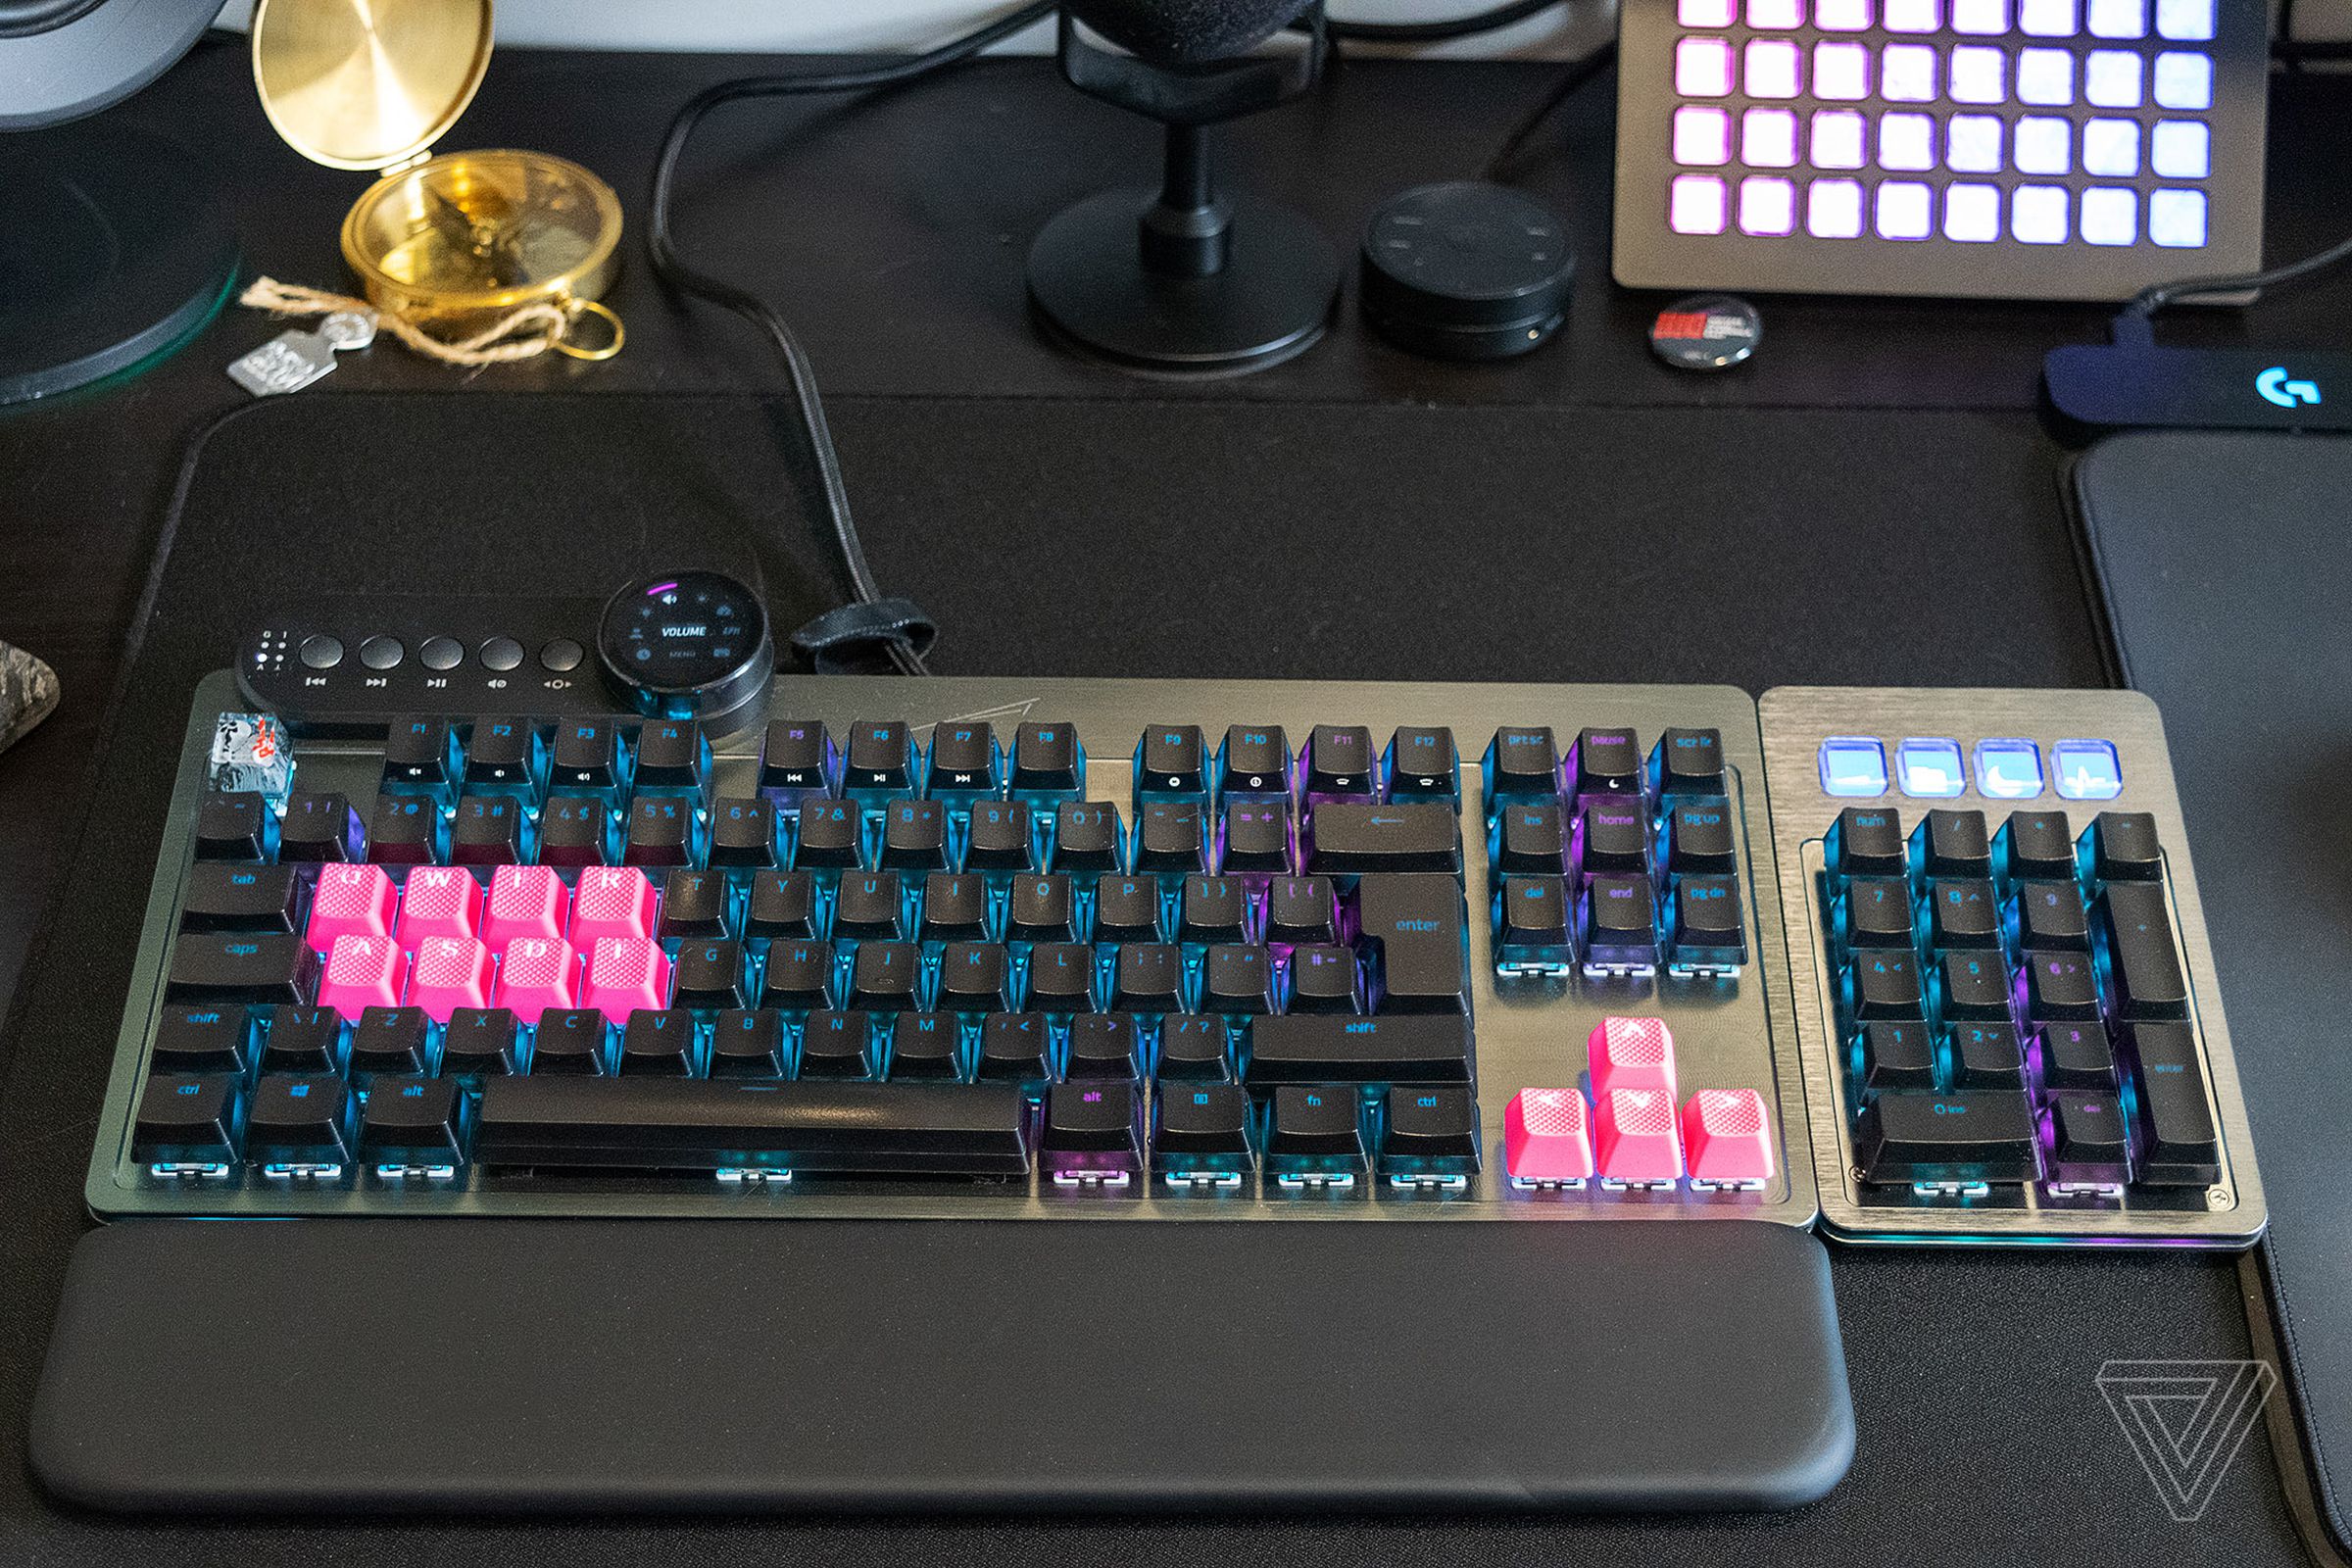 The modular form factor of the Mountain Everest Max makes it a unique and flexible gaming keyboard